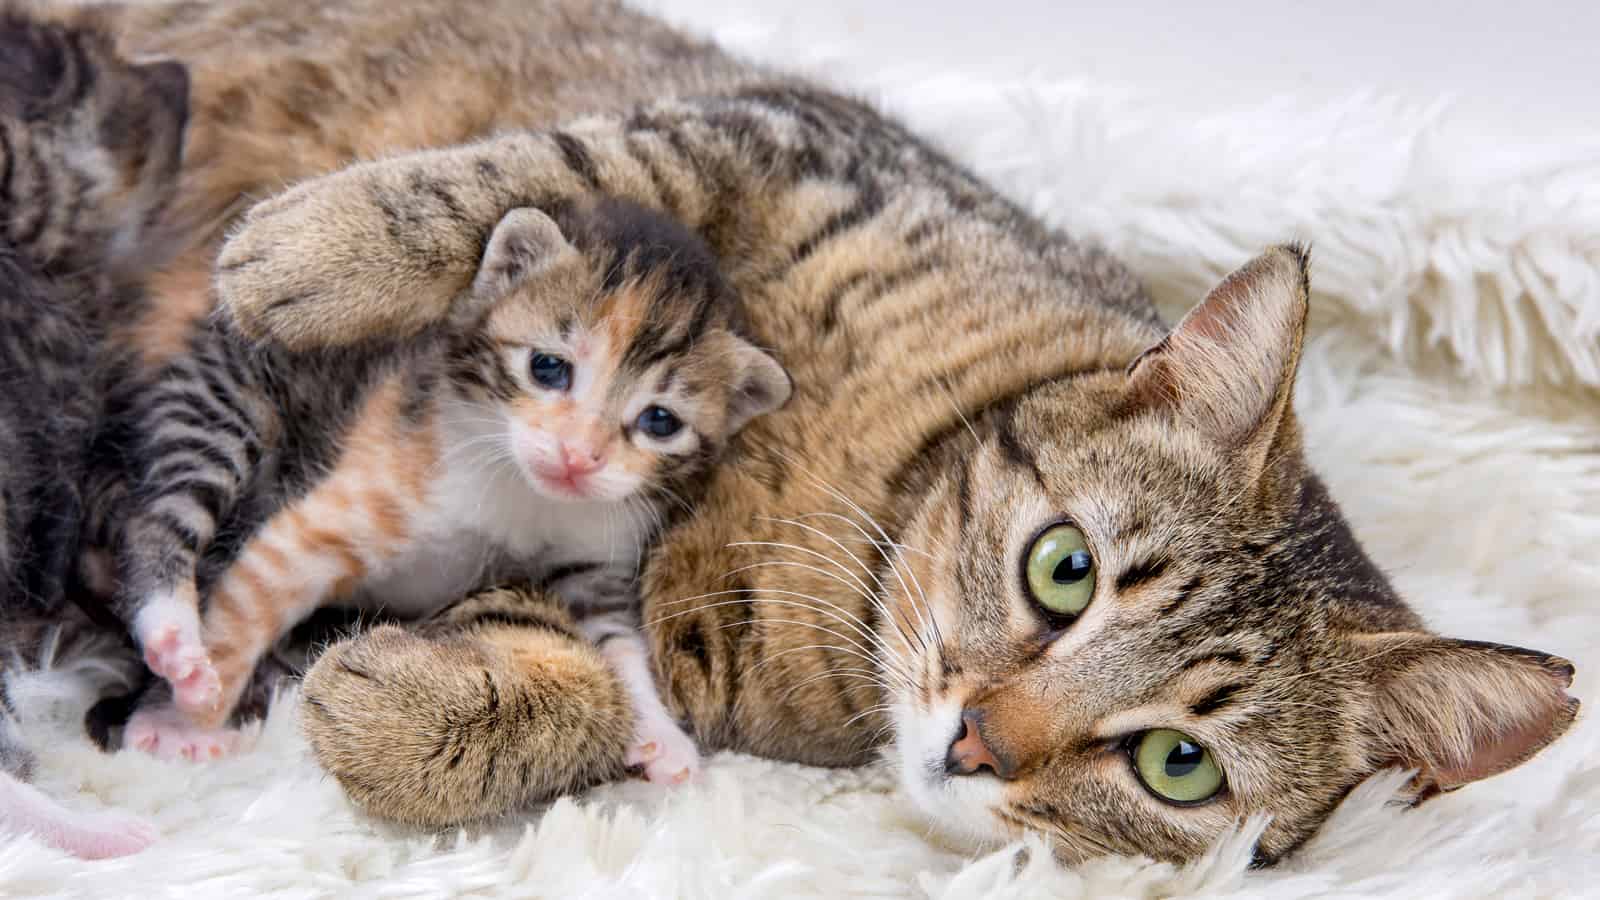 Mom cat (mother cat) and baby cat (kitten)  in one frame